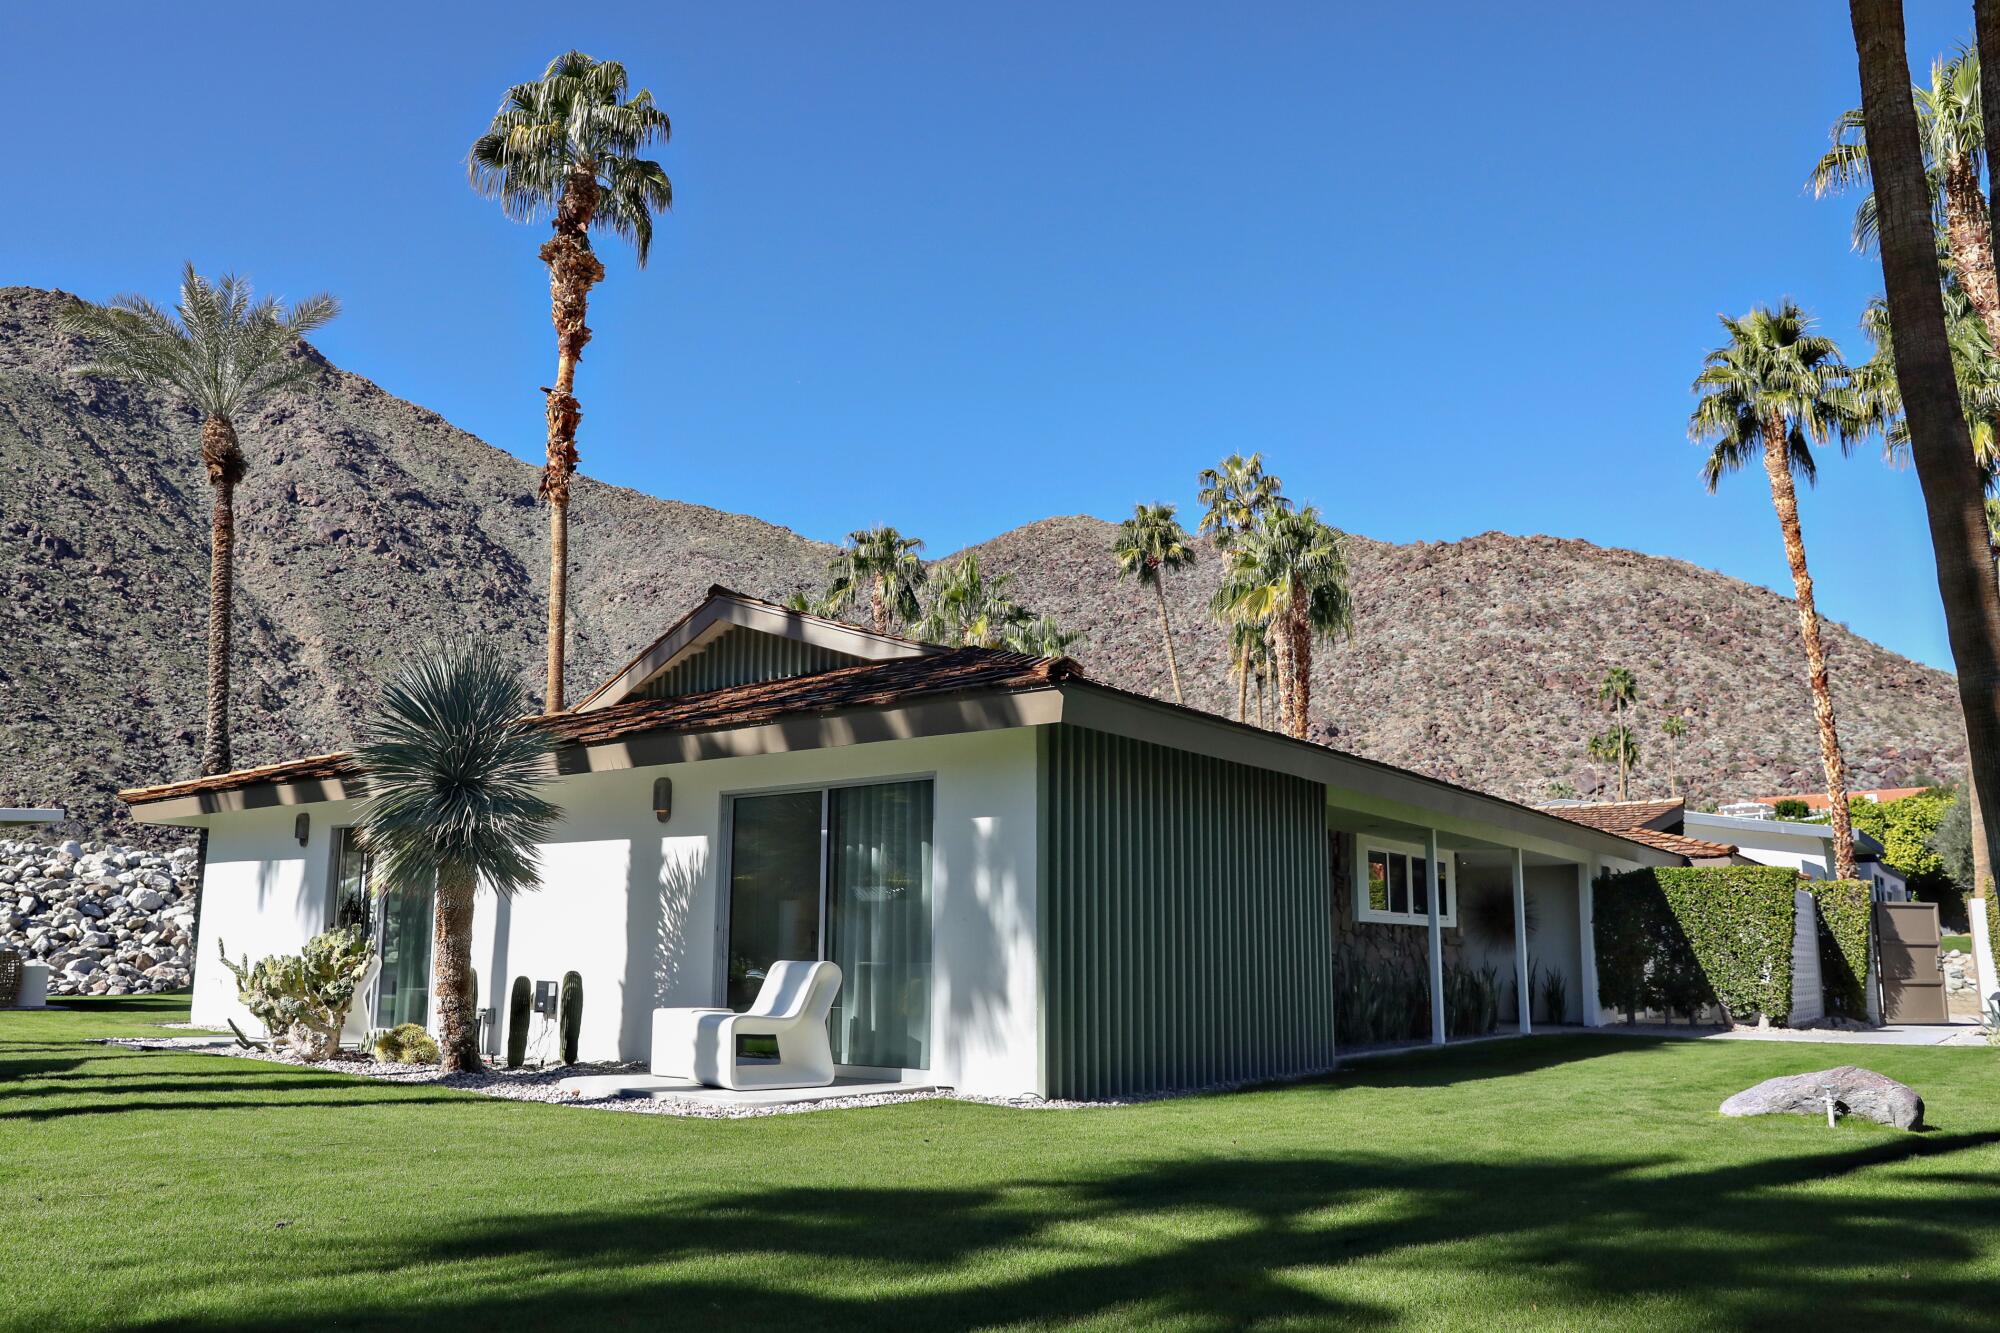 Exterior of a Midcentury Modern home set amid grass and palm trees, with mountains in the background